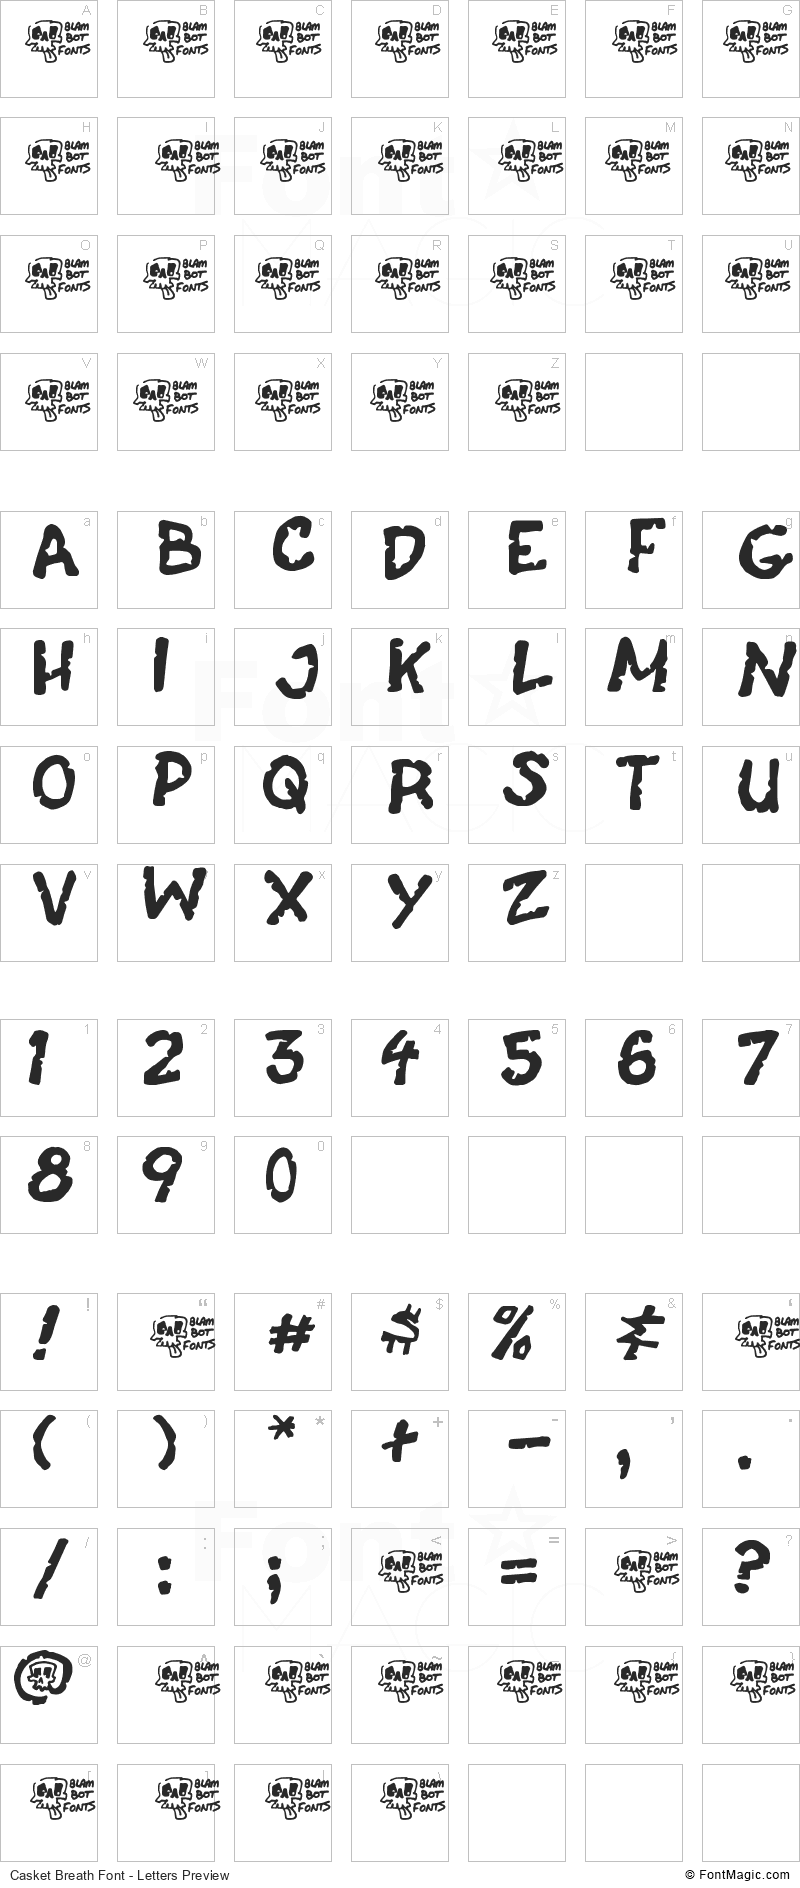 Casket Breath Font - All Latters Preview Chart